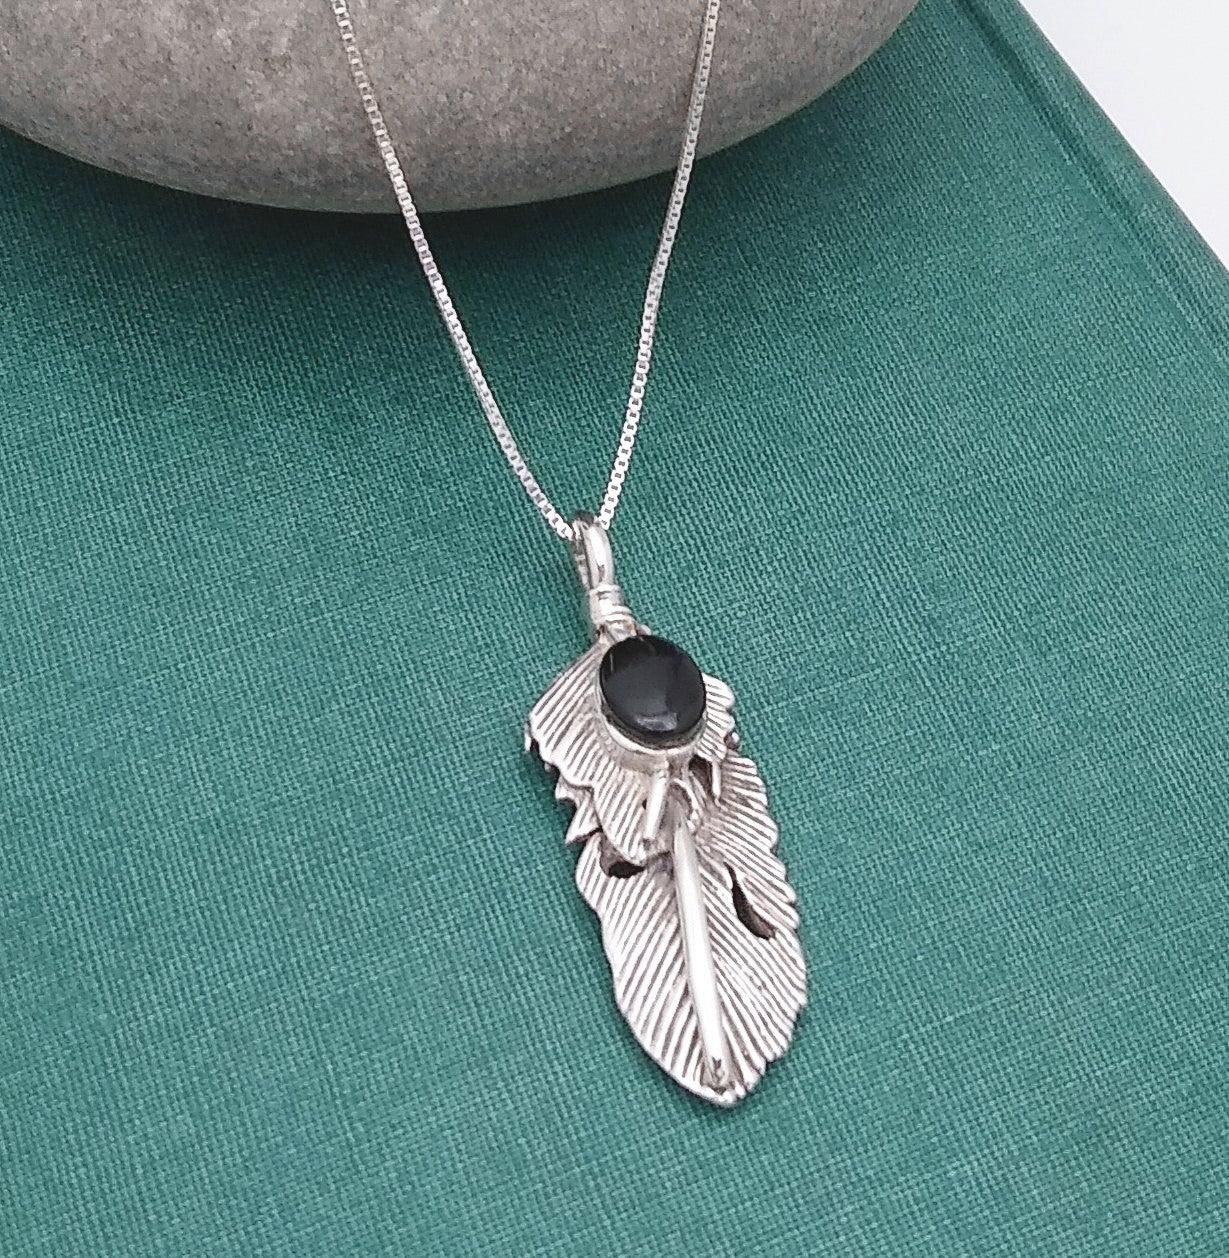 Sterling silver feather design with venations etched into the metal, and a small Onyx stone at the top. Comes on an 18-inch sterling chain